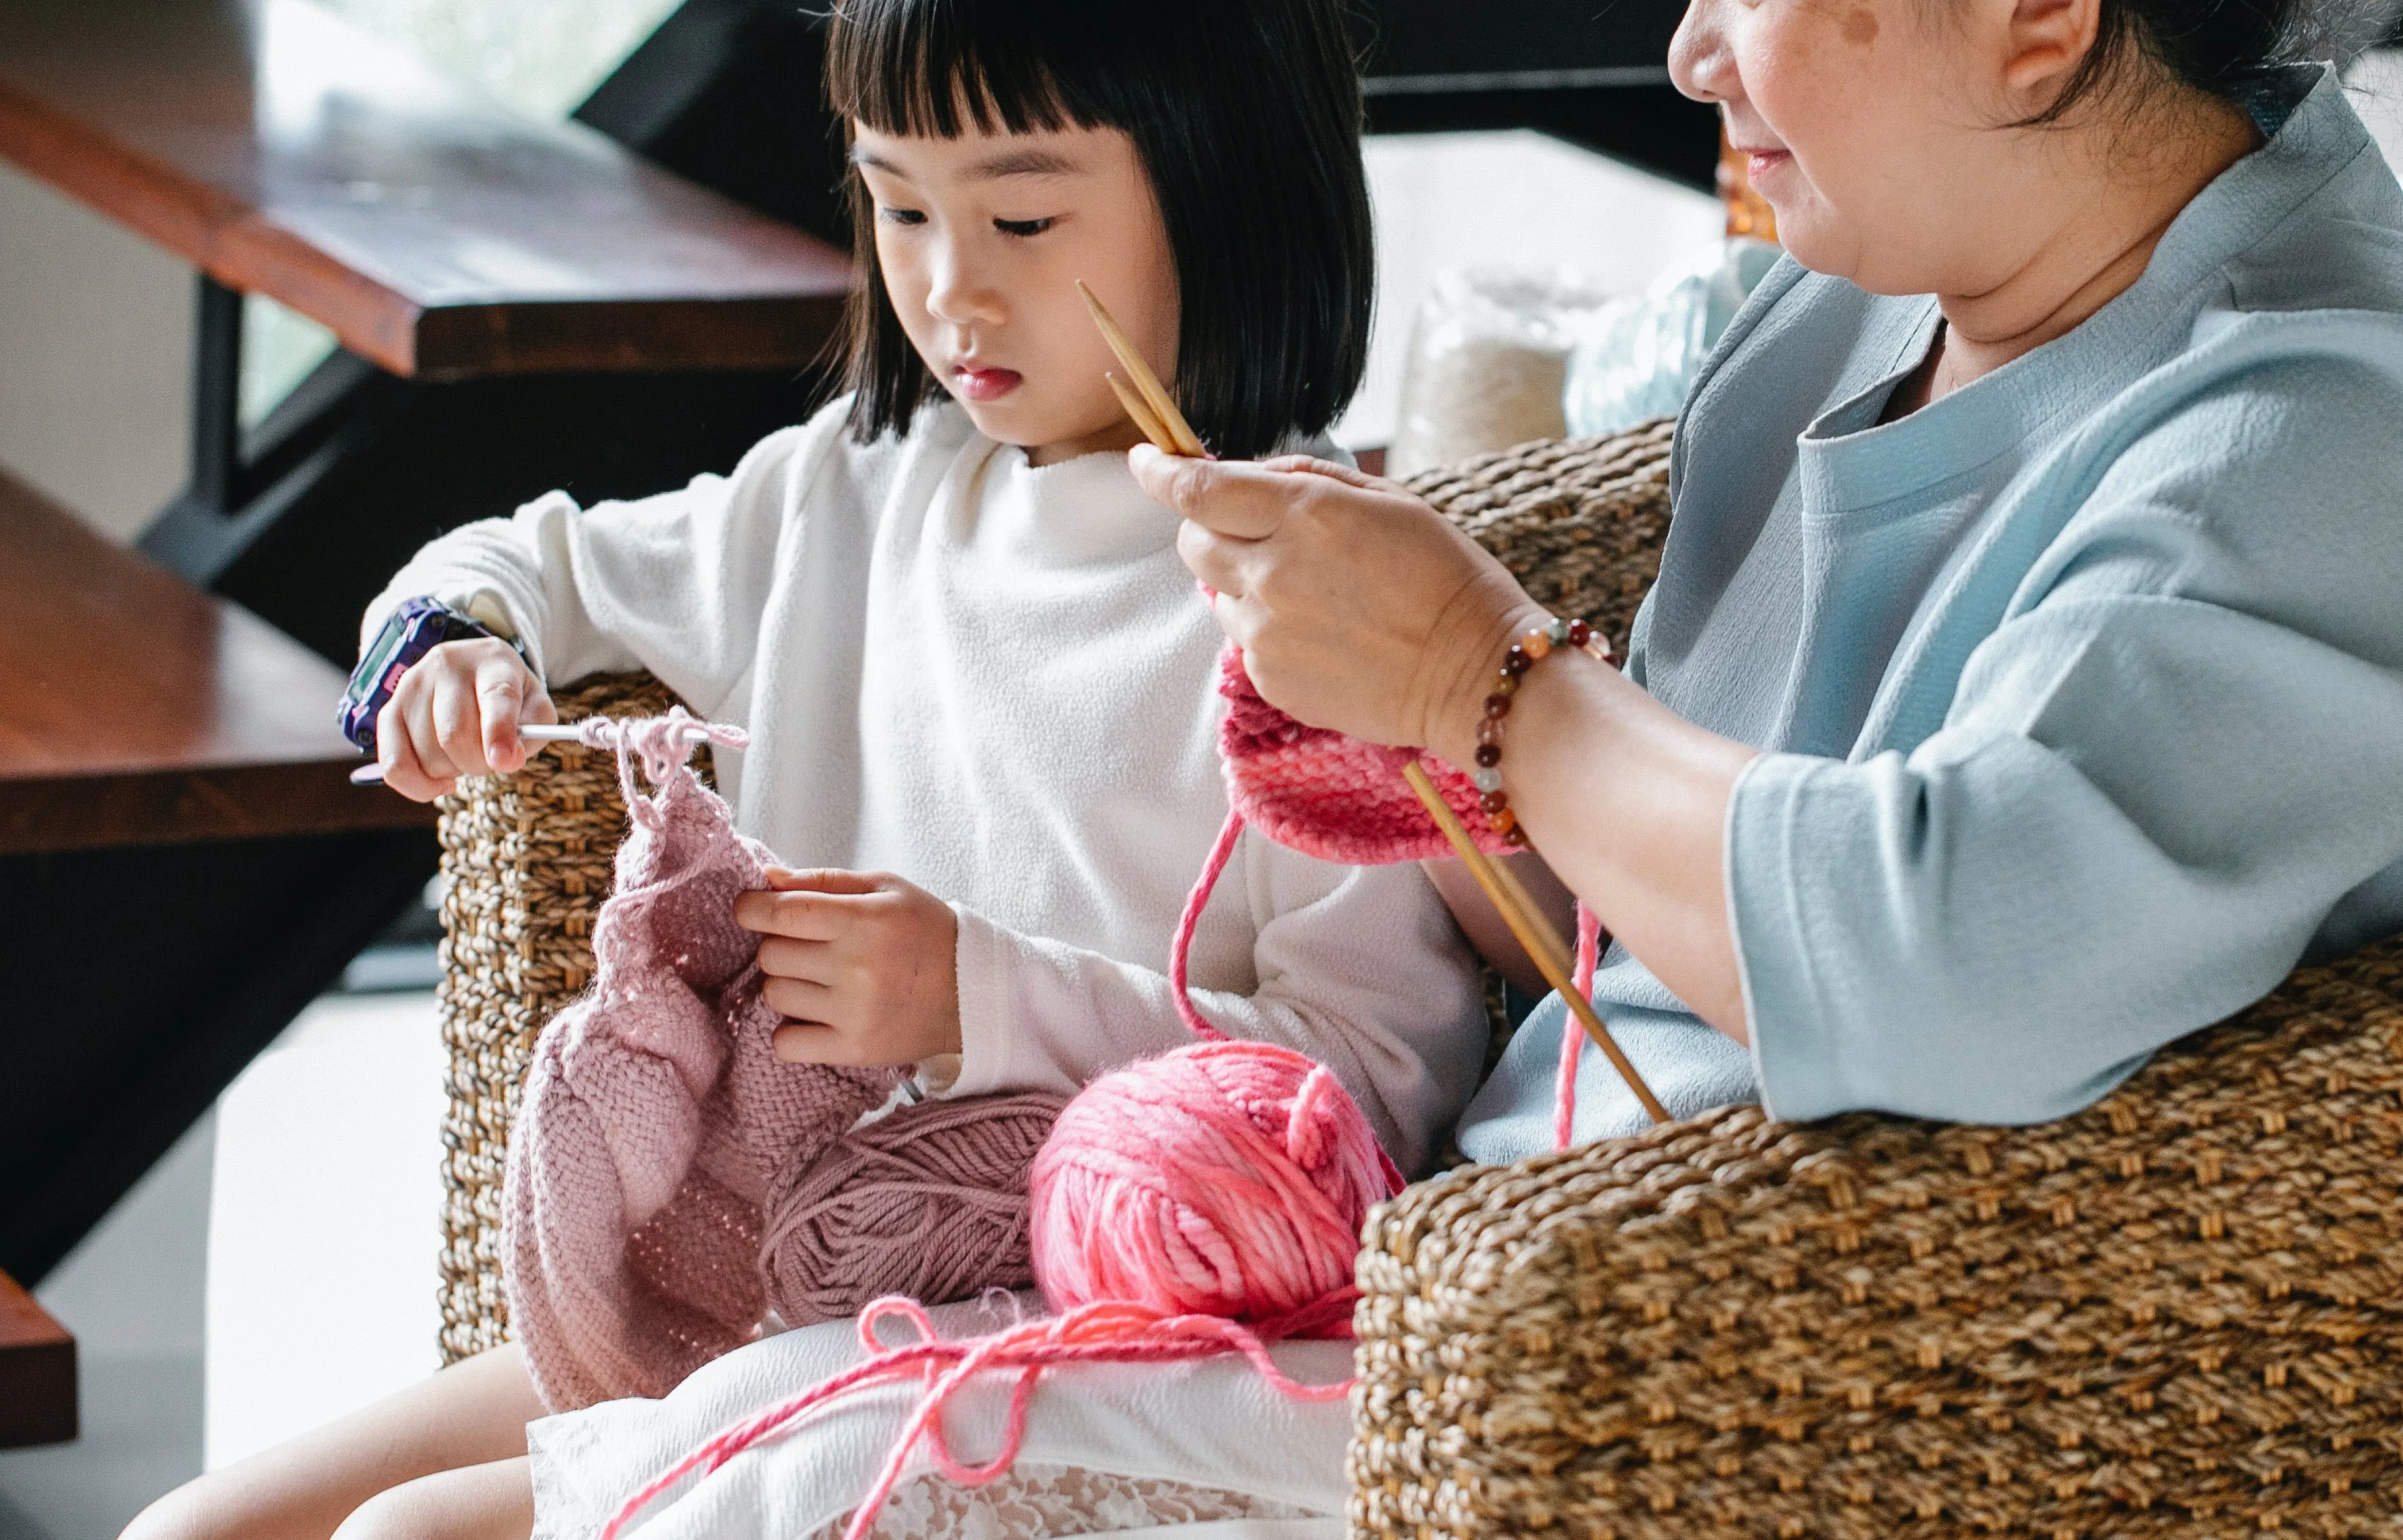 The Art of Knitting and Crochet for Relaxation